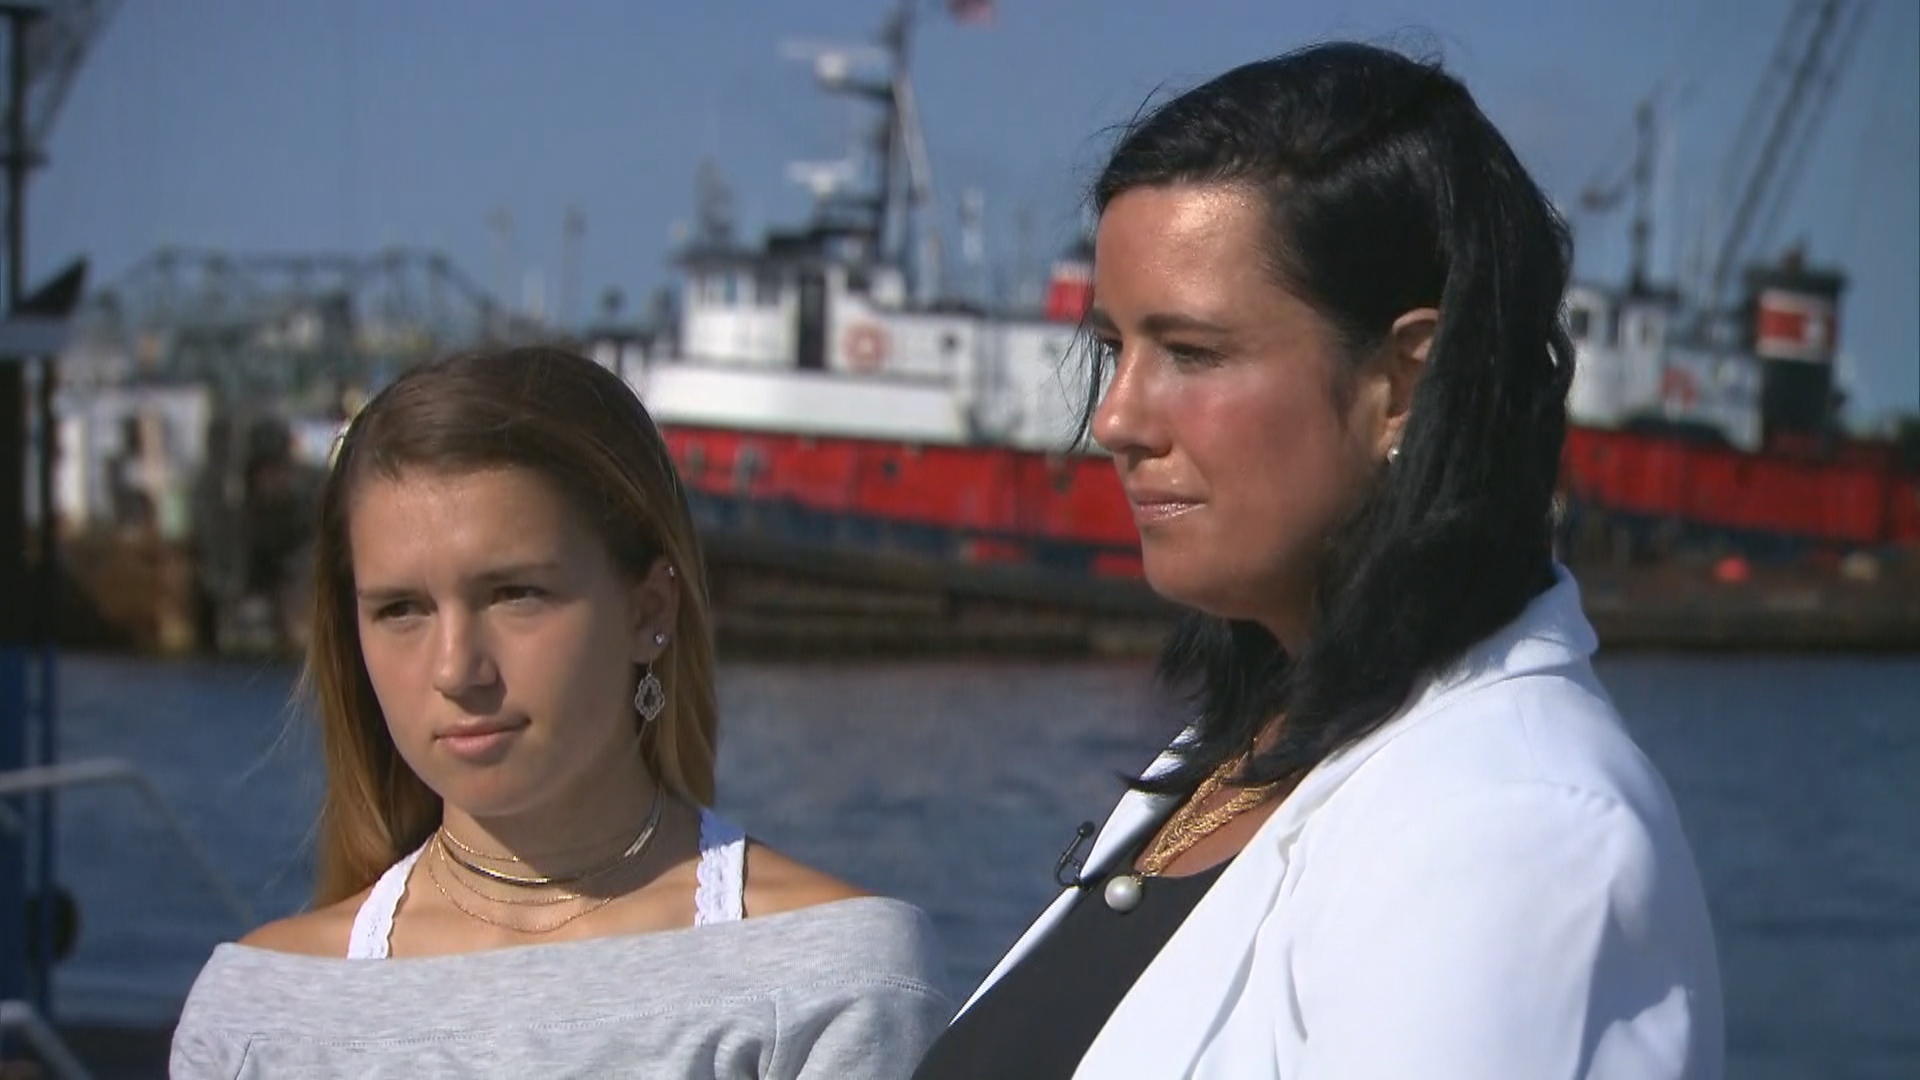 Mom of texting suicide victim speaks out after woman gets 15-month sentence - CBS News